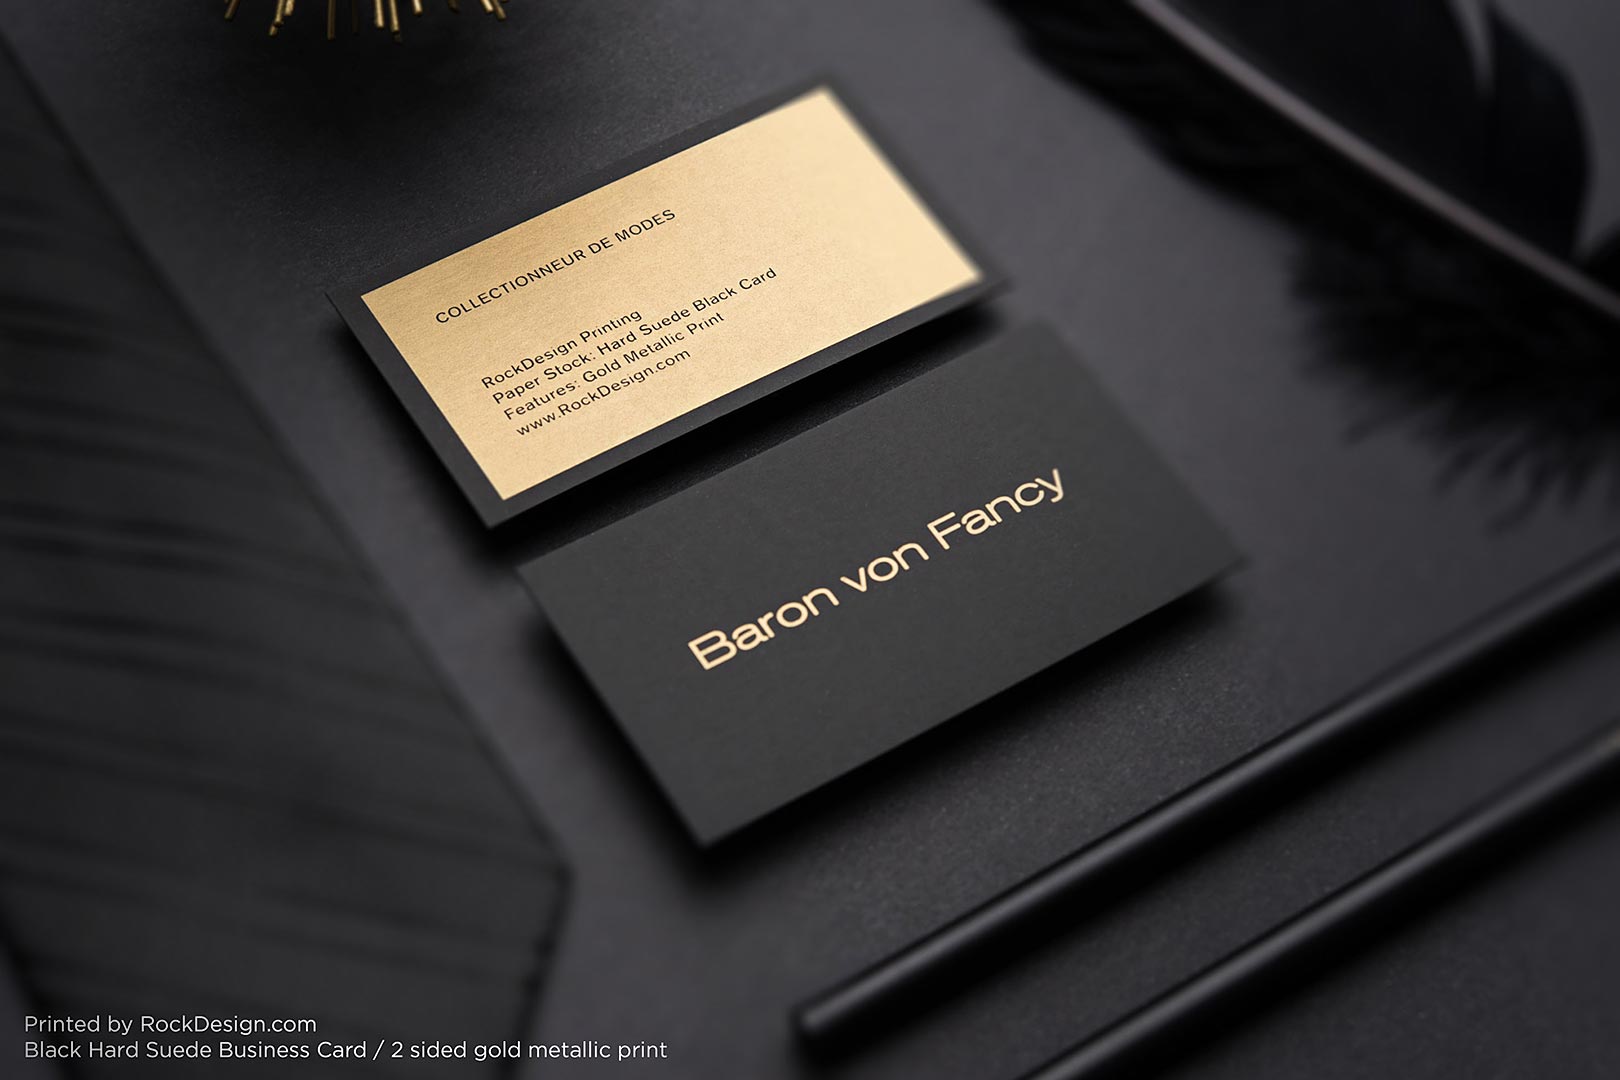 Over 100 FREE luxury business card templates | RockDesign.com